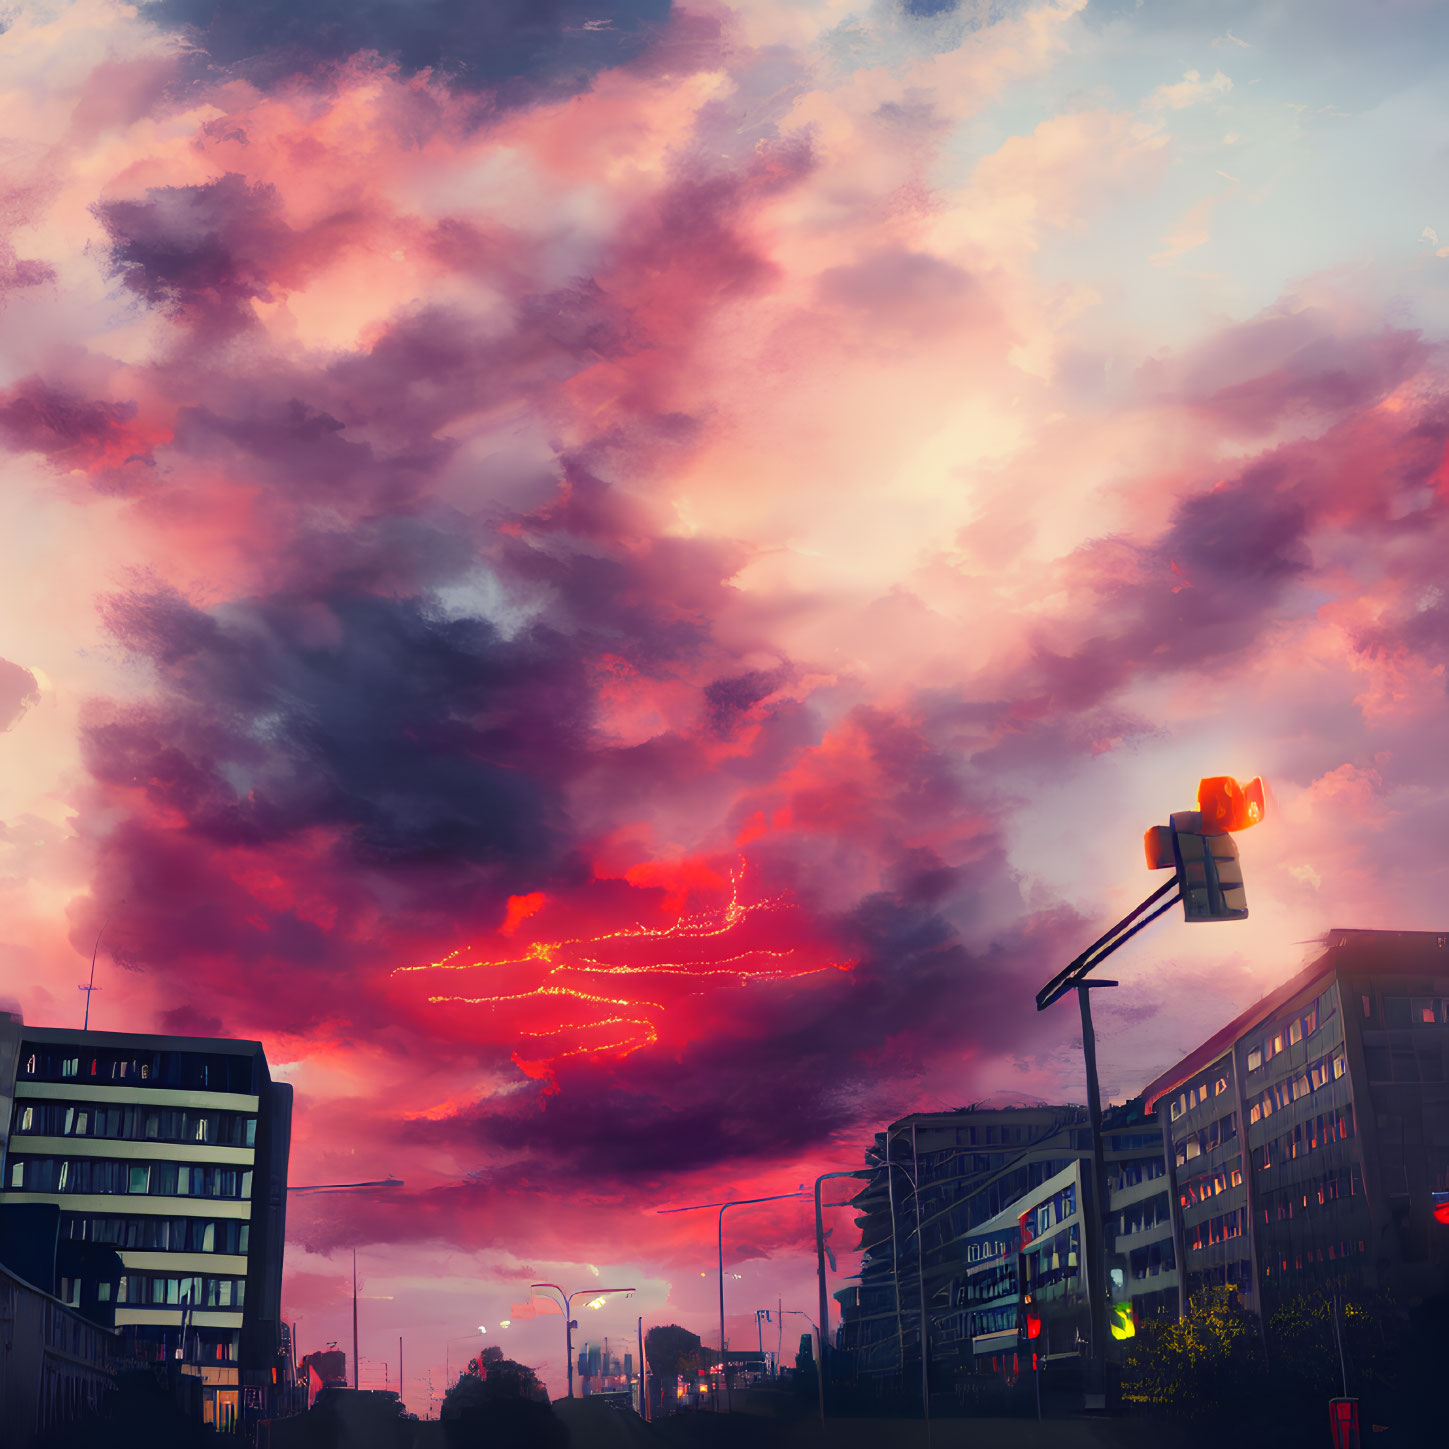 Dramatic red and pink sunset over cityscape with traffic light and buildings